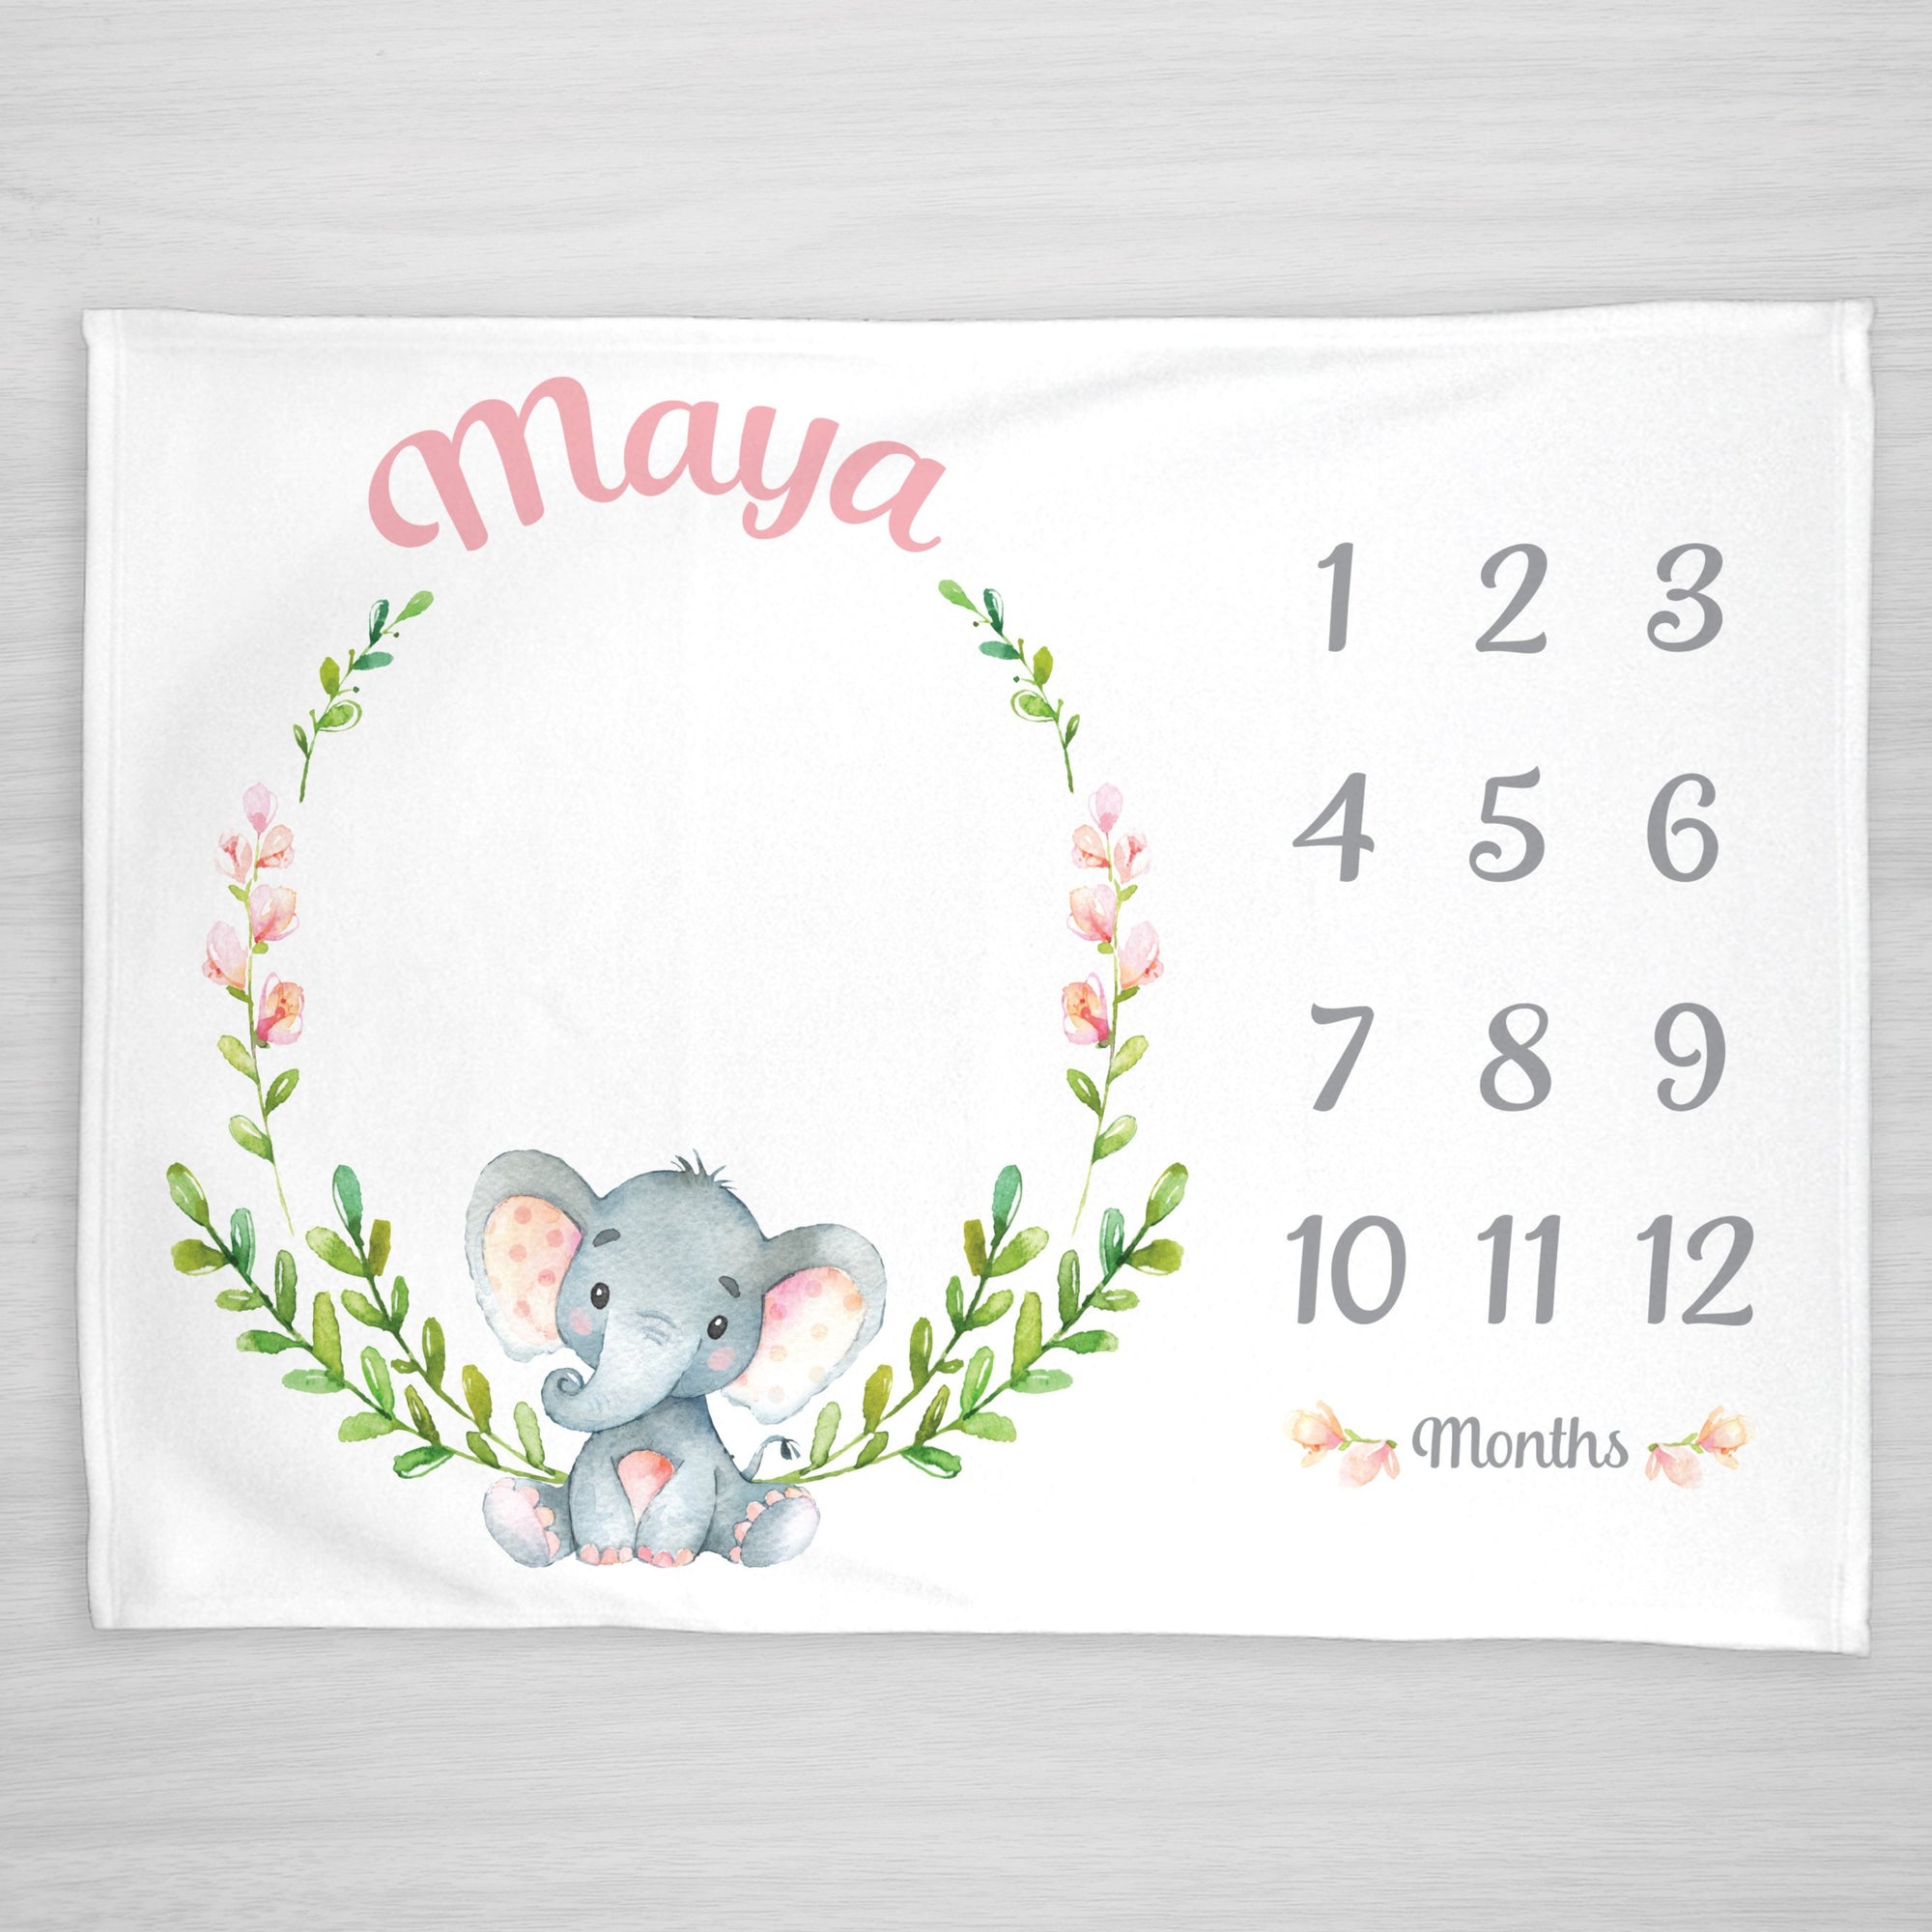 Elephant Milestone Baby Girl Blanket, Pink flowers and wreath, personalized